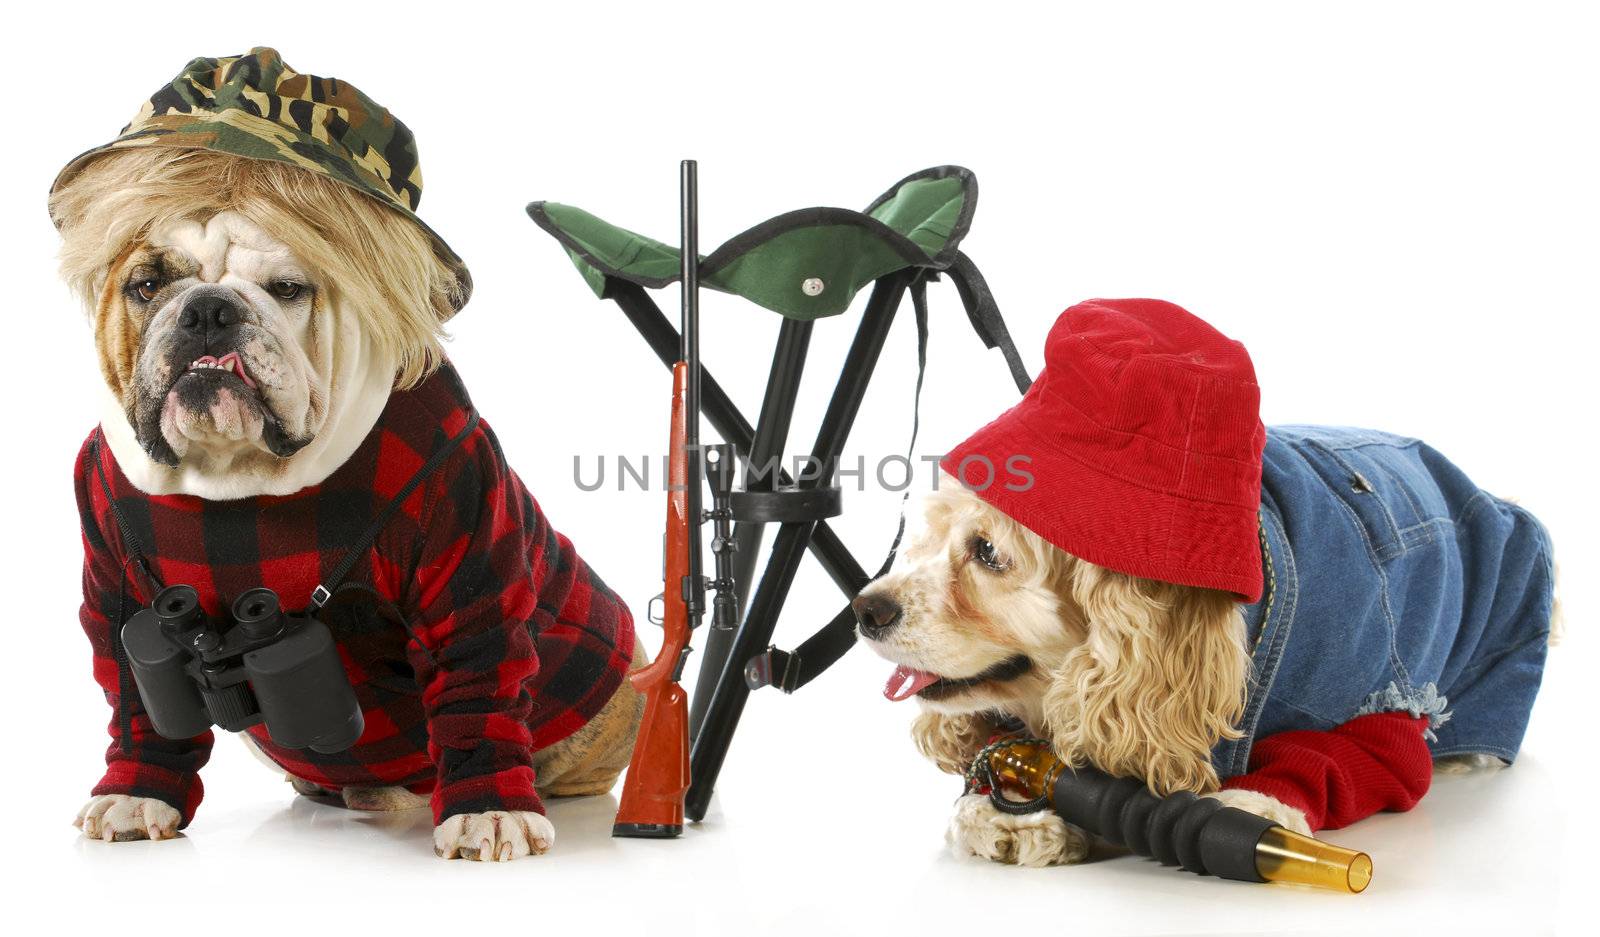 hunting dogs - american cocker spaniel and english bulldog dressed up like hunting dogs isolated on white background